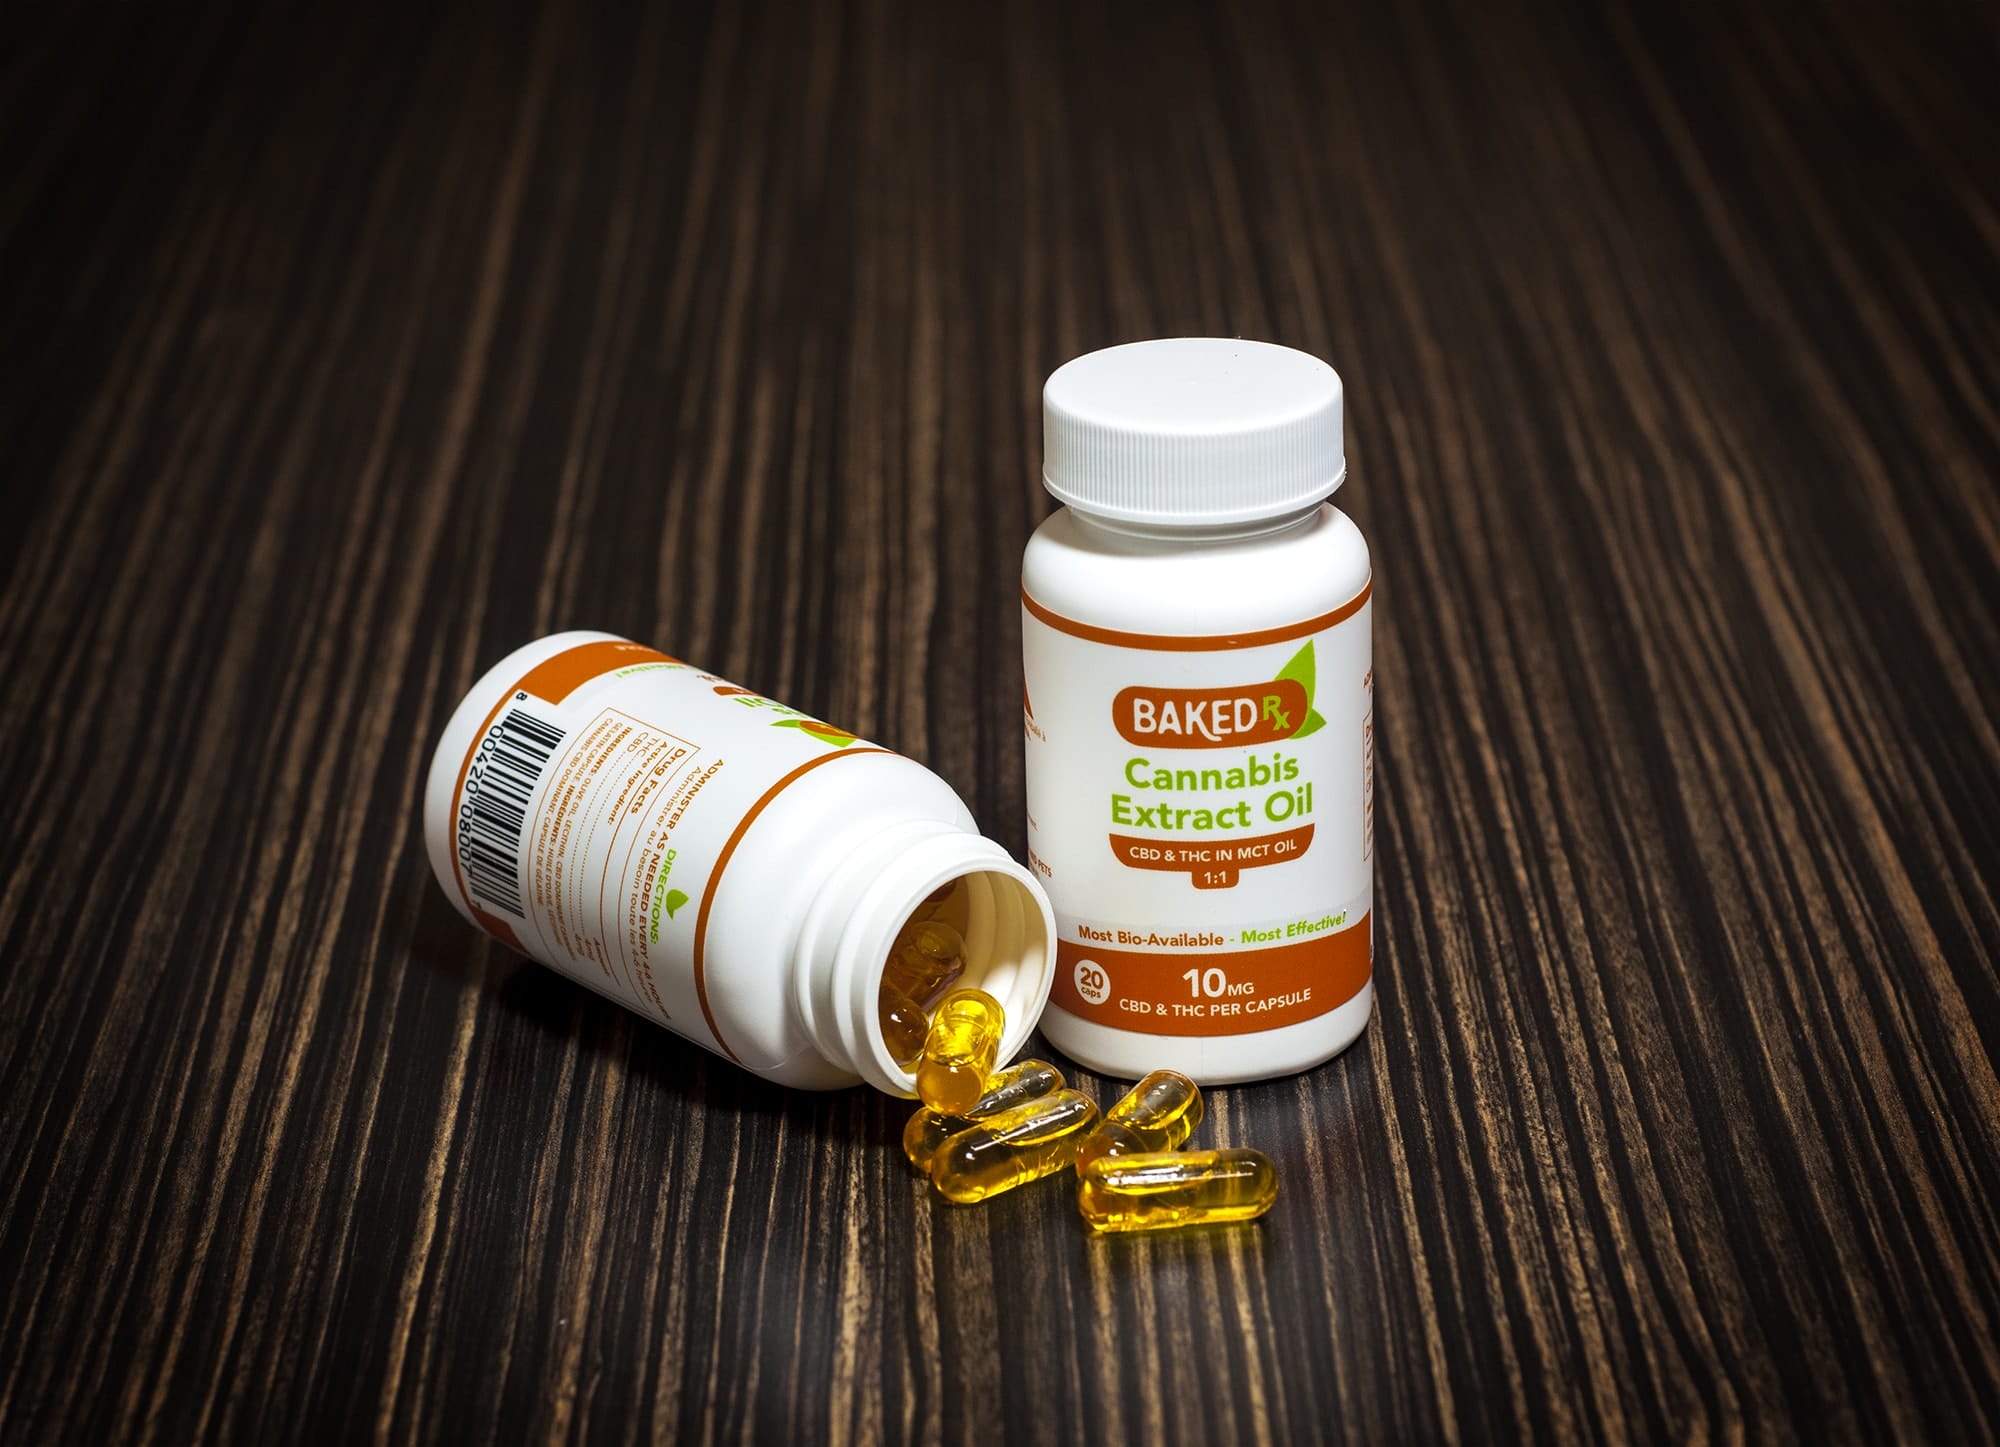 Baked - Cannabis Extract Oil Capsule